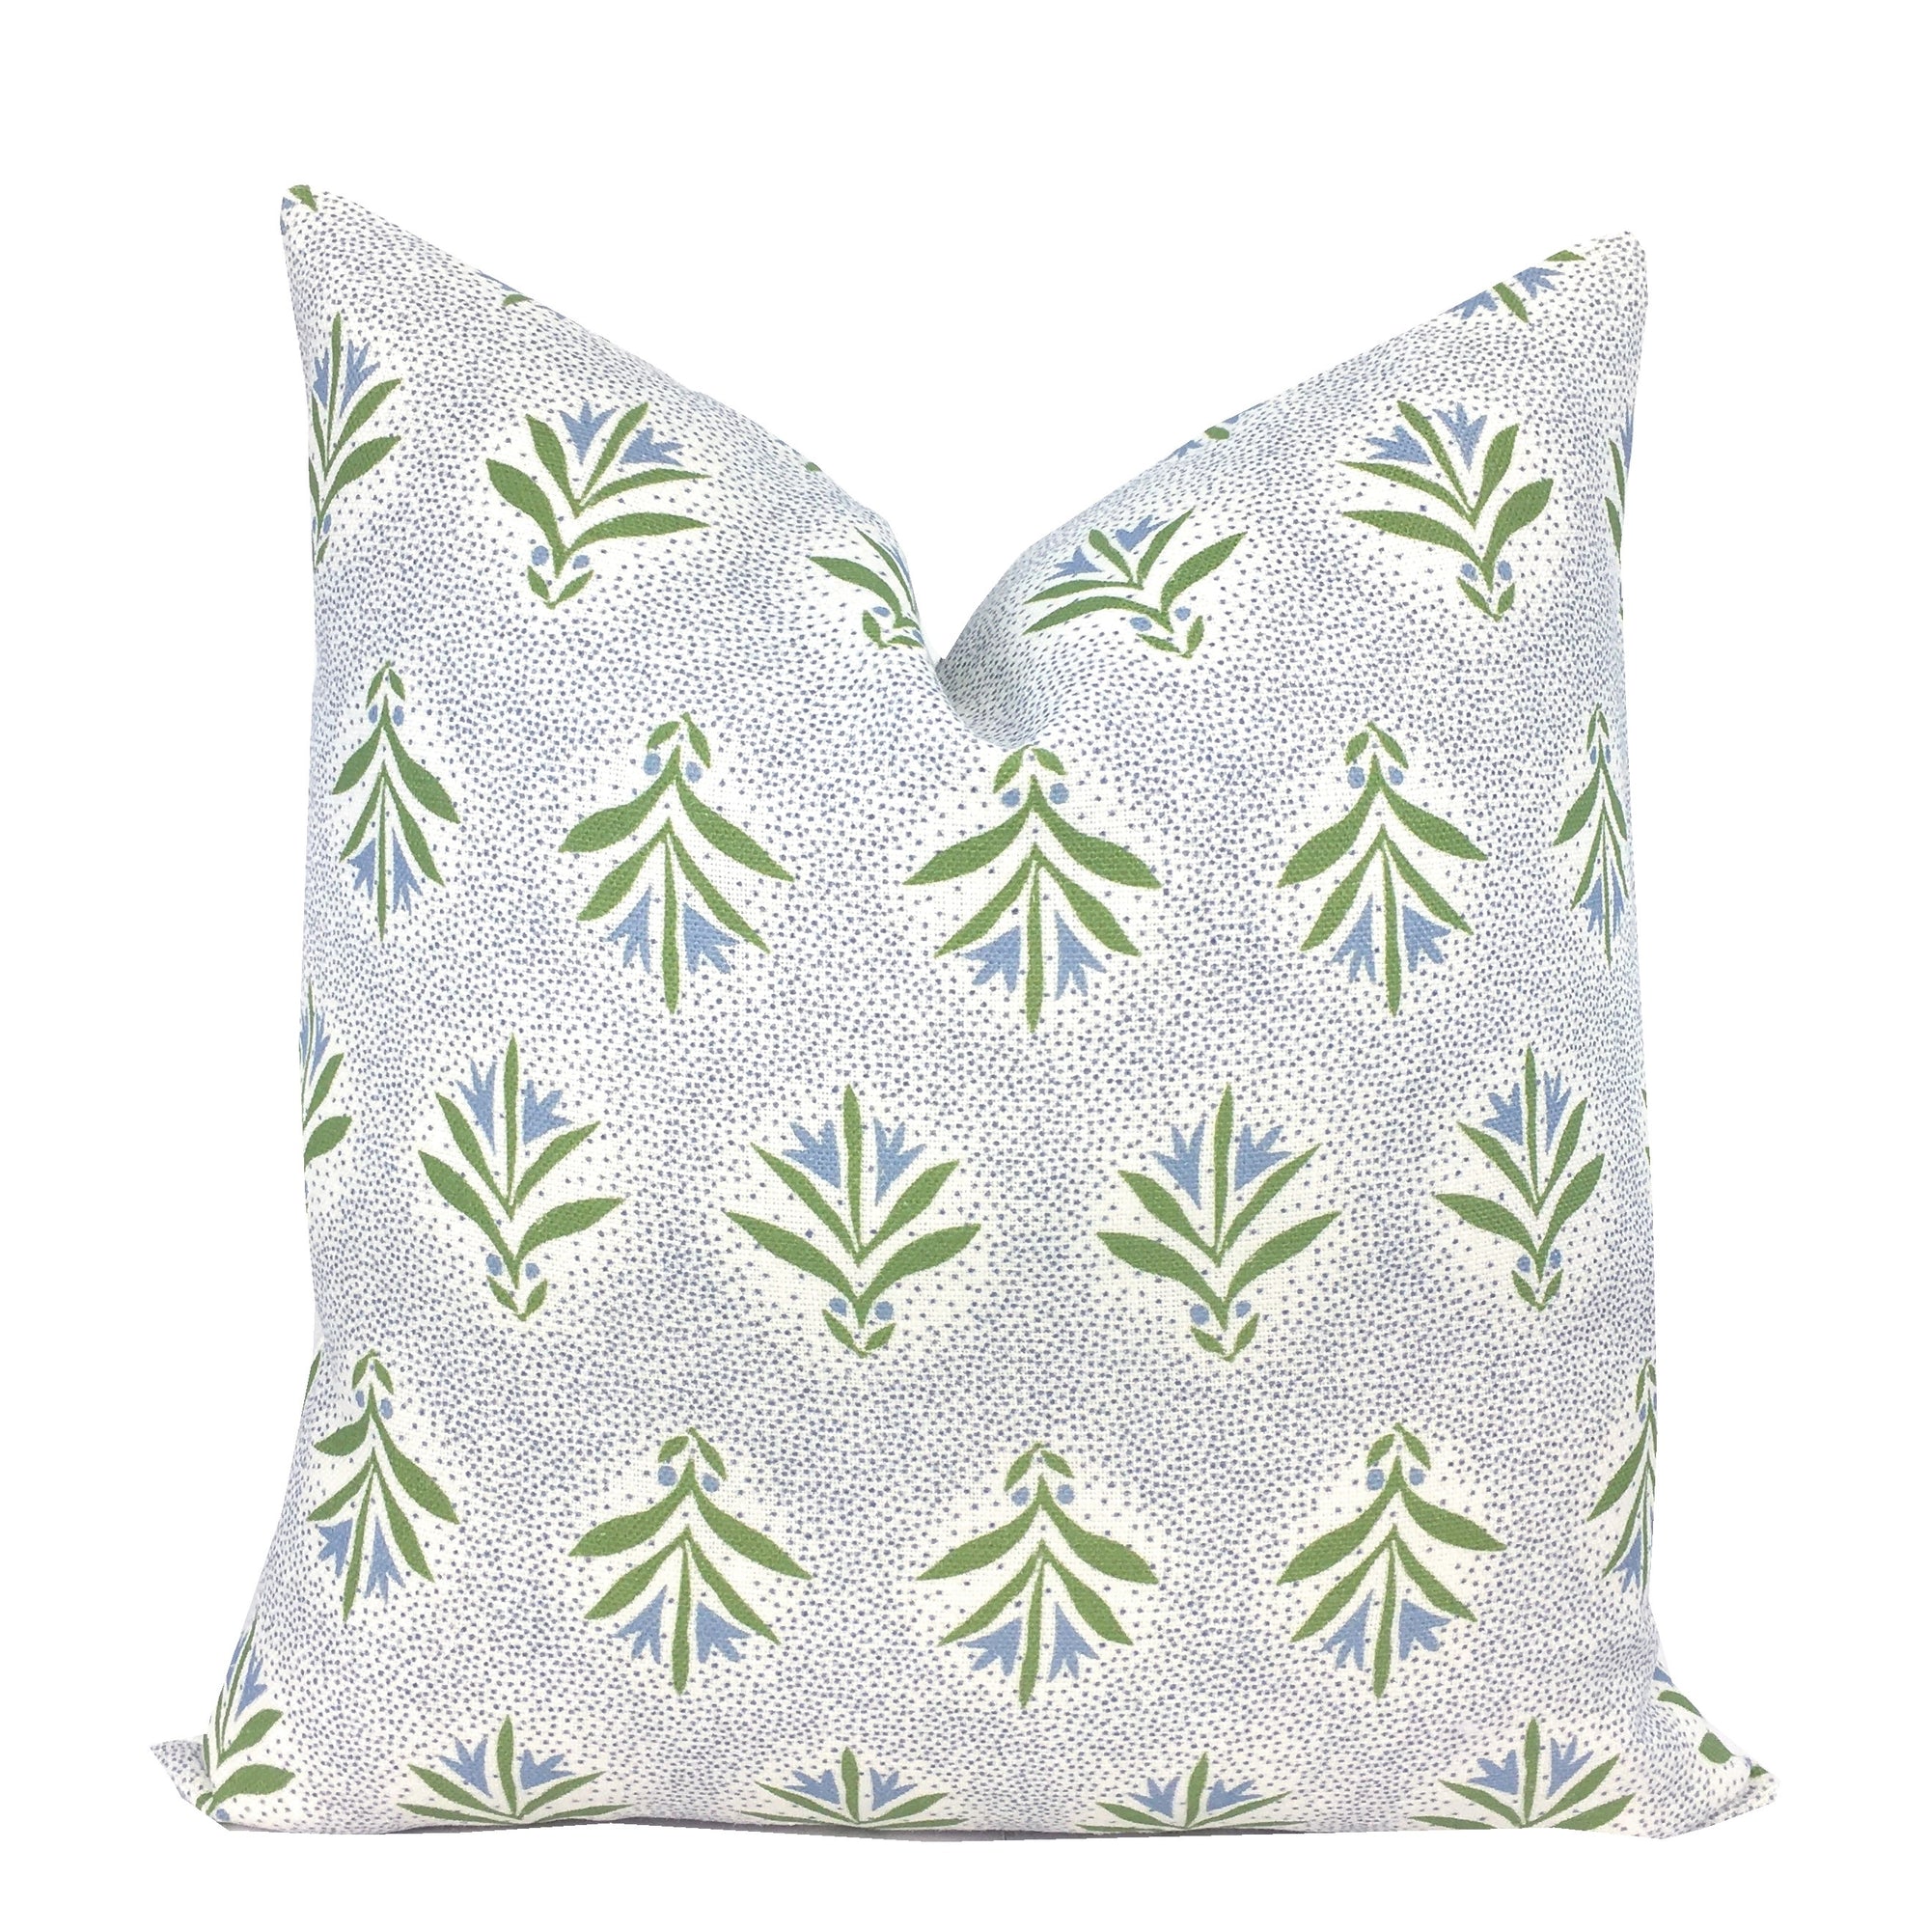 Catie Pillow Cover | Soft Sky Blue and Green on Ivory Belgian Linen